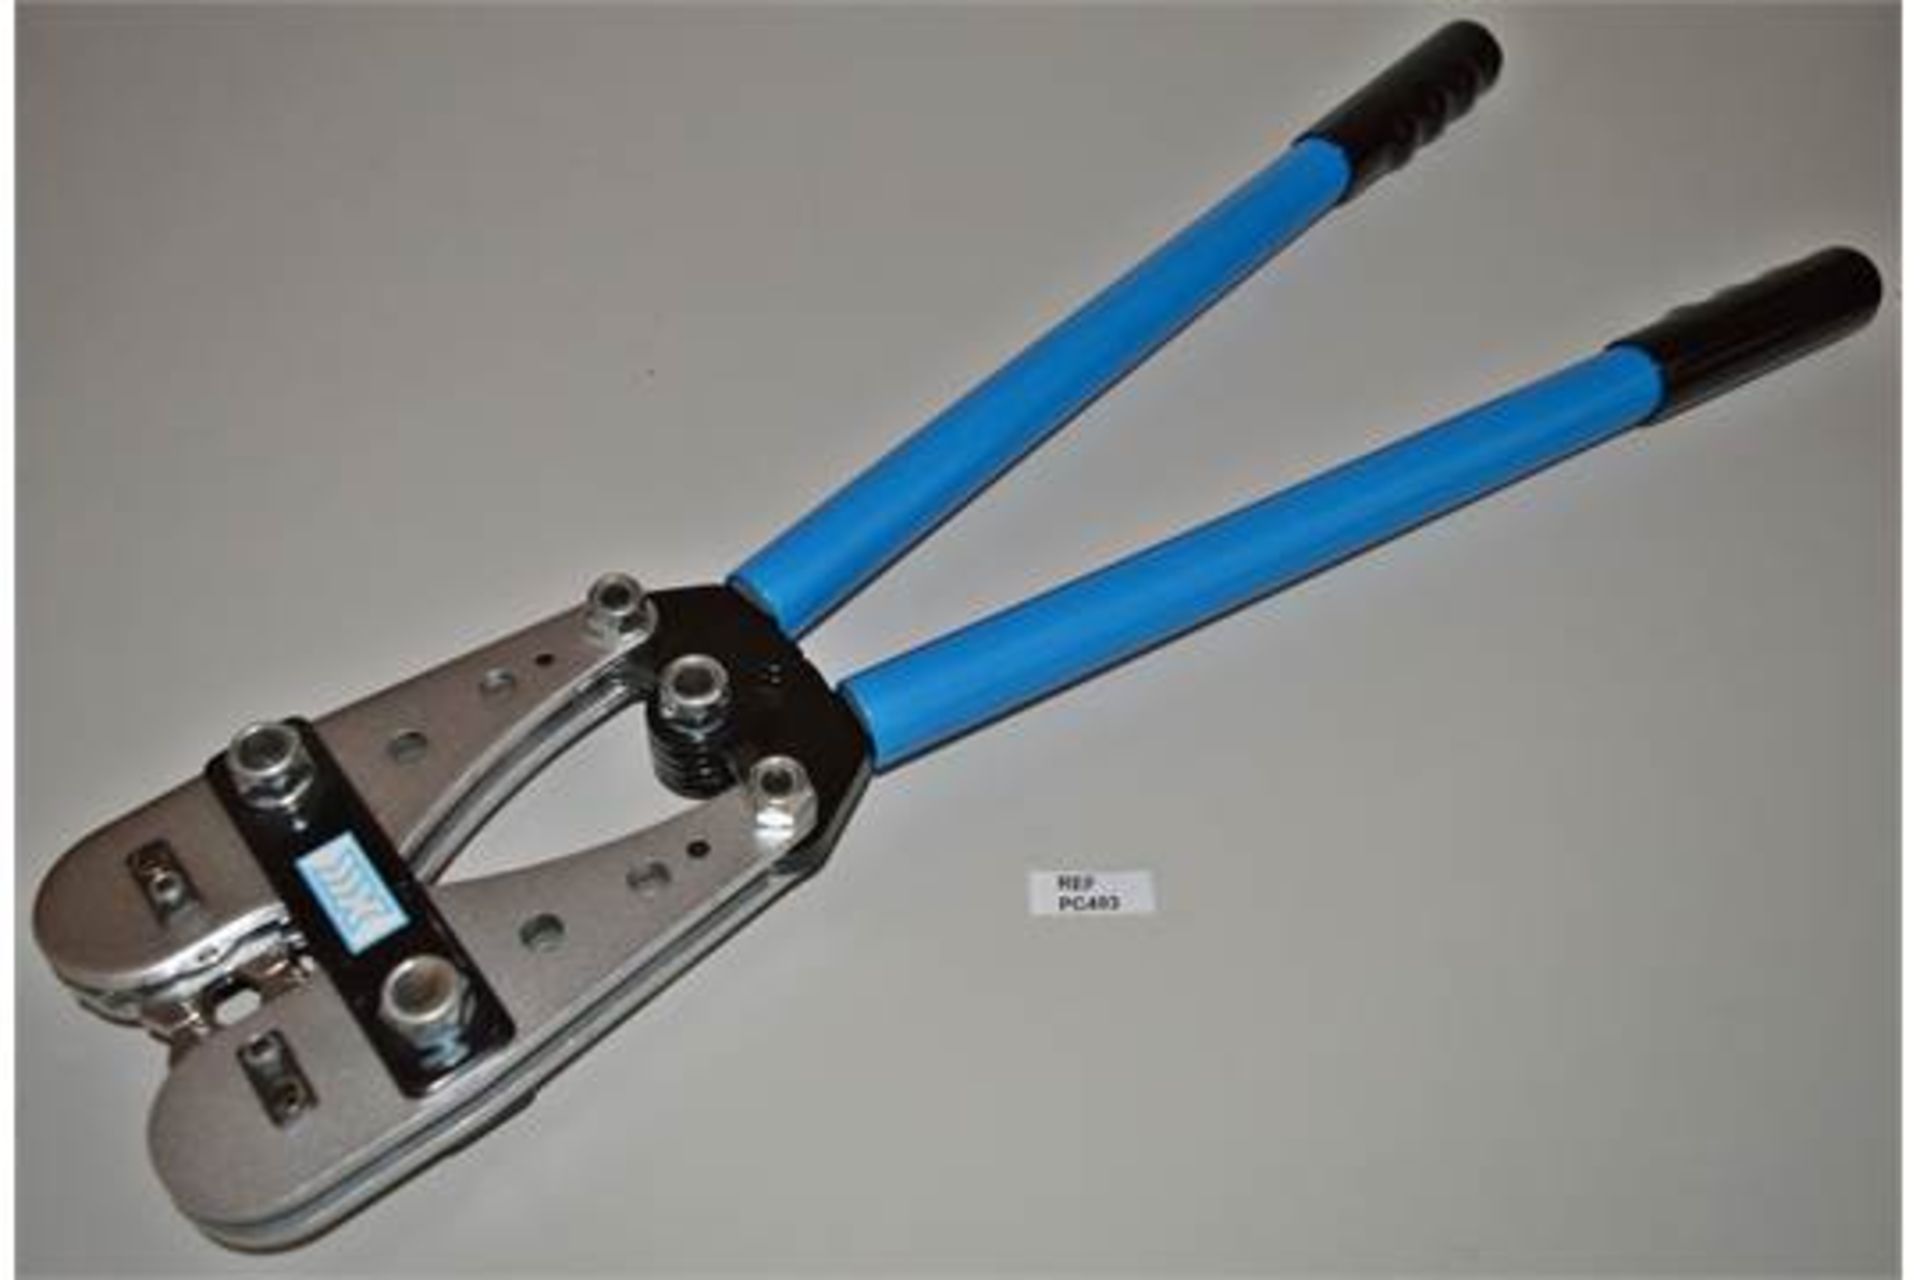 1 x HD Copper Tube Terrminal Crimp Tool With Adjustable Hex - 62cm Length - XXX Branded - New and - Image 2 of 4